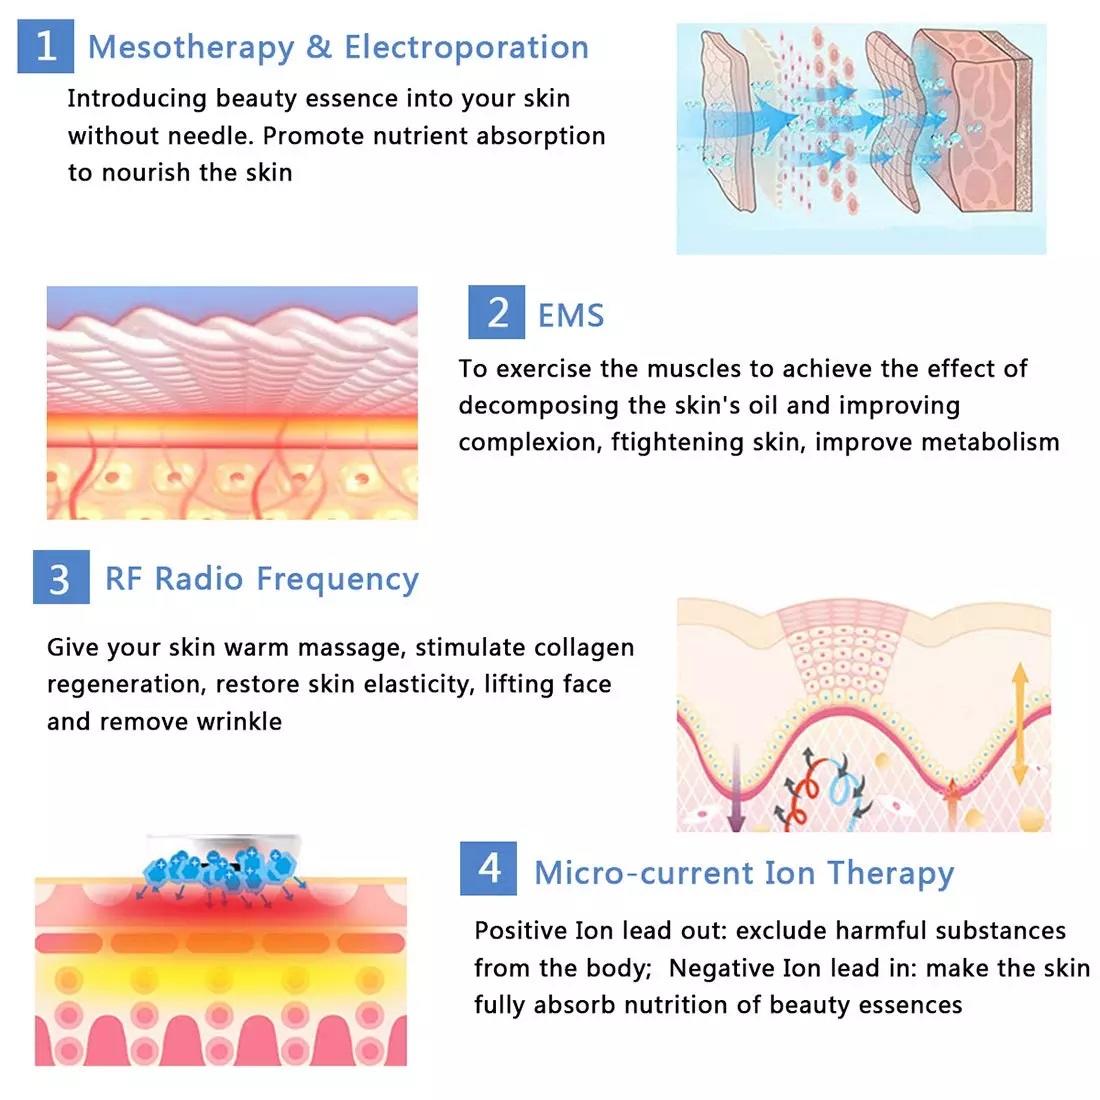 5 Photon light therapy with RF